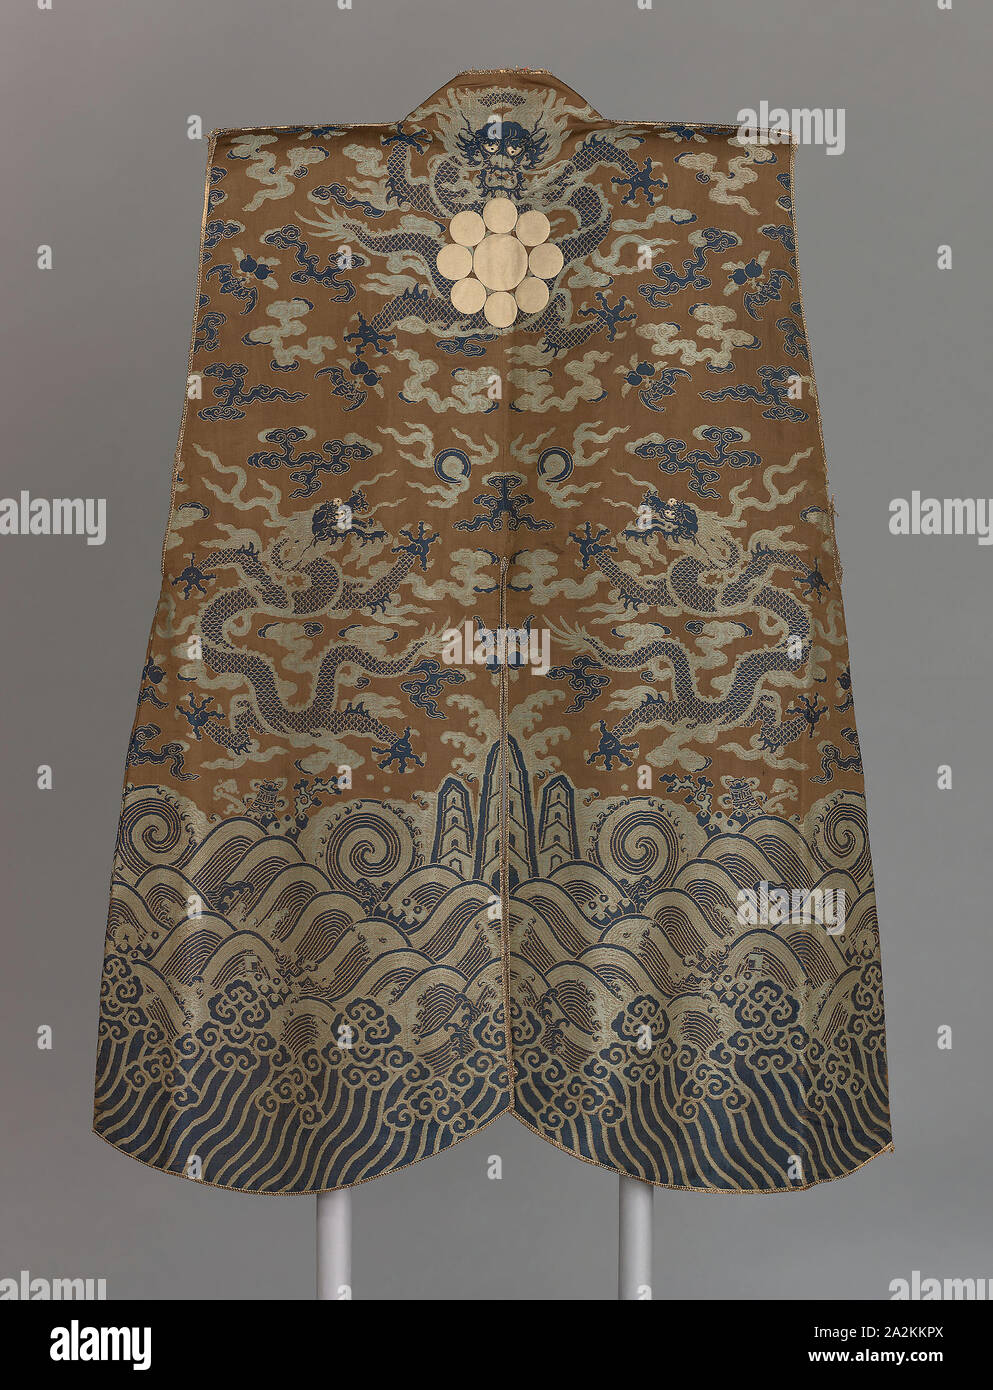 Jinbaori (Surcoat), Edo period (1615–1868), c. 1750, Japan, Silk, warp-float faced 2:1 'Z' twill weave with weft-float faced 1:2 'S' twill interlacings of secondary binding warps and supplementary patterning wefts with painted details, mon: wool, plain weave, fulled, lined with: silk and metal-foil-over-lacquered-paper strips, warp-float-faced 4:1 satin with supplementary brocading wefts bound by main warps in weft-float-faced 1:4 satin interlacings, edged with silk and gilt-silver-over-lacquered-paper strips, 4:1 'Z' twill weave with supplementary patterning warps and wefts, kikkô: silk and Stock Photo